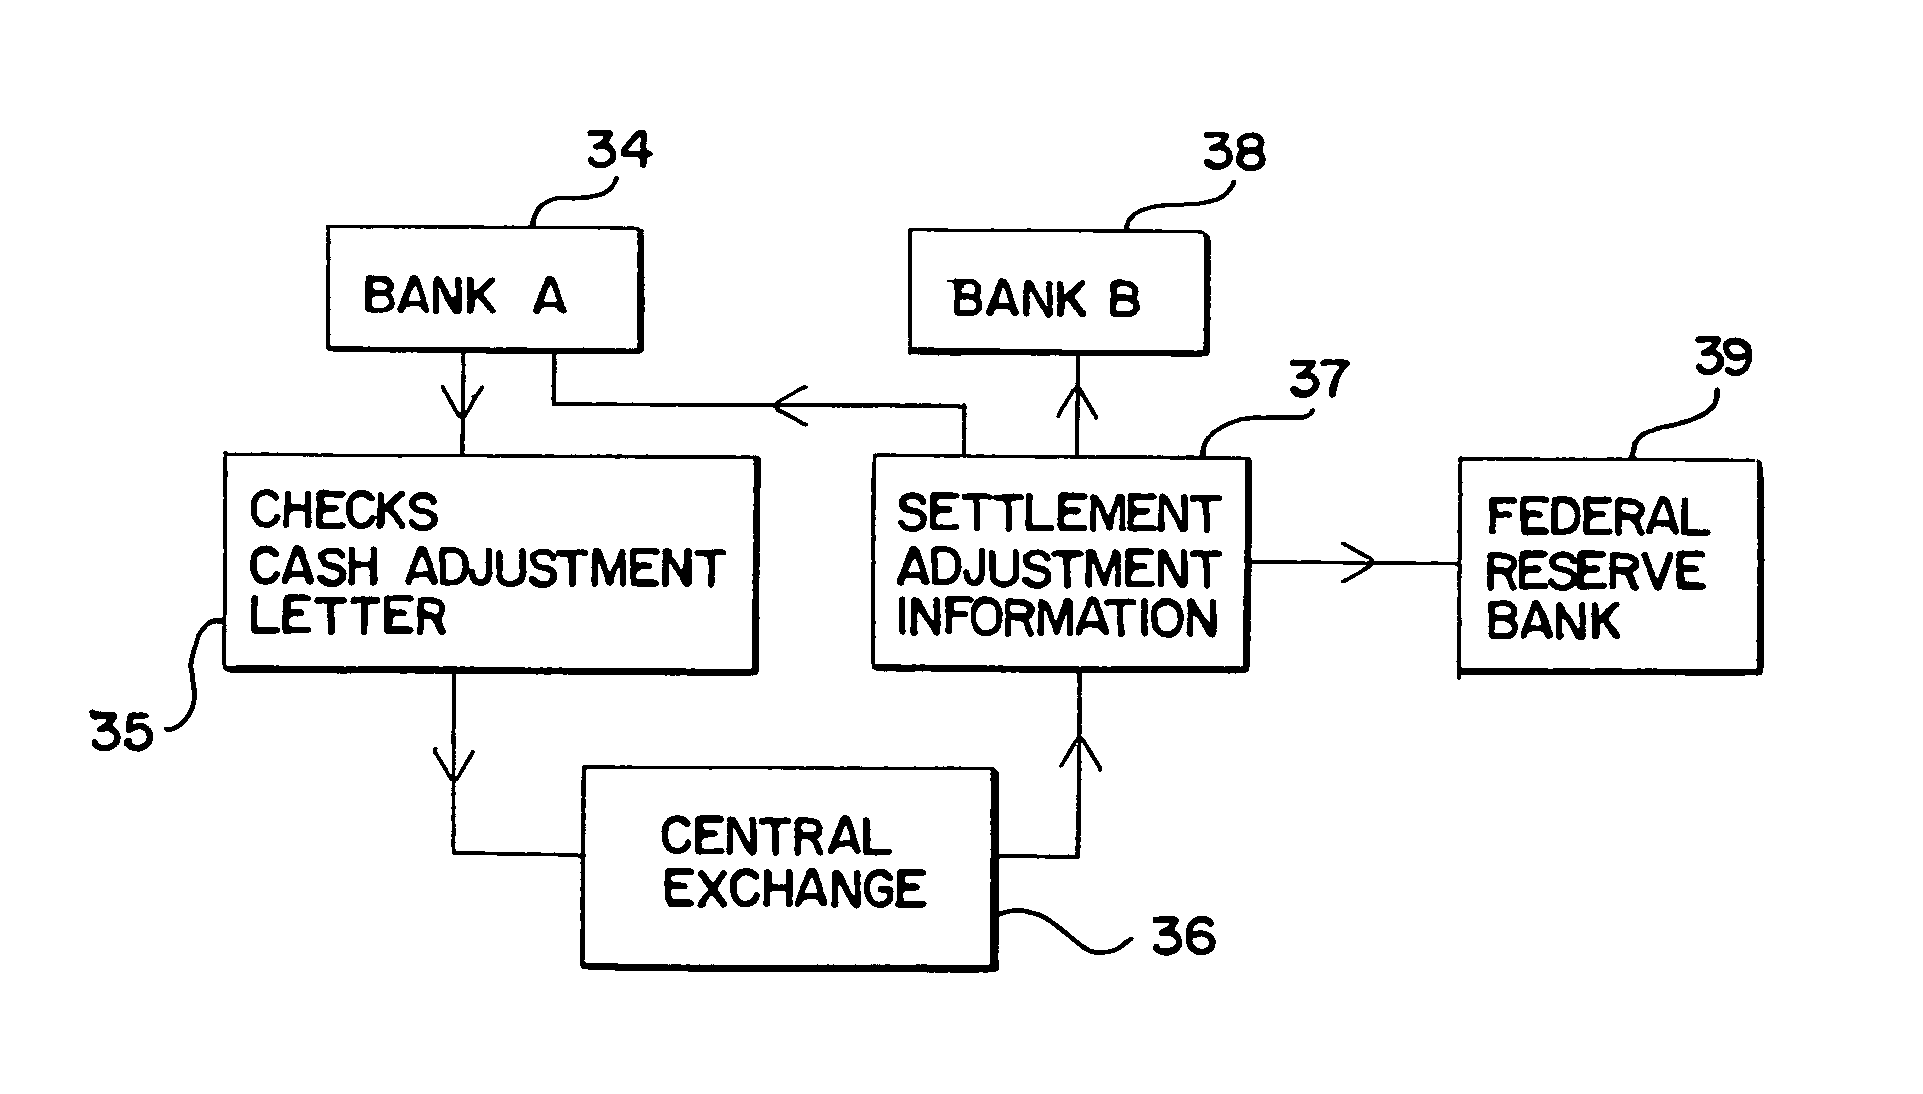 Electronic exchange and settlement system for cash letter adjustments for financial institutions